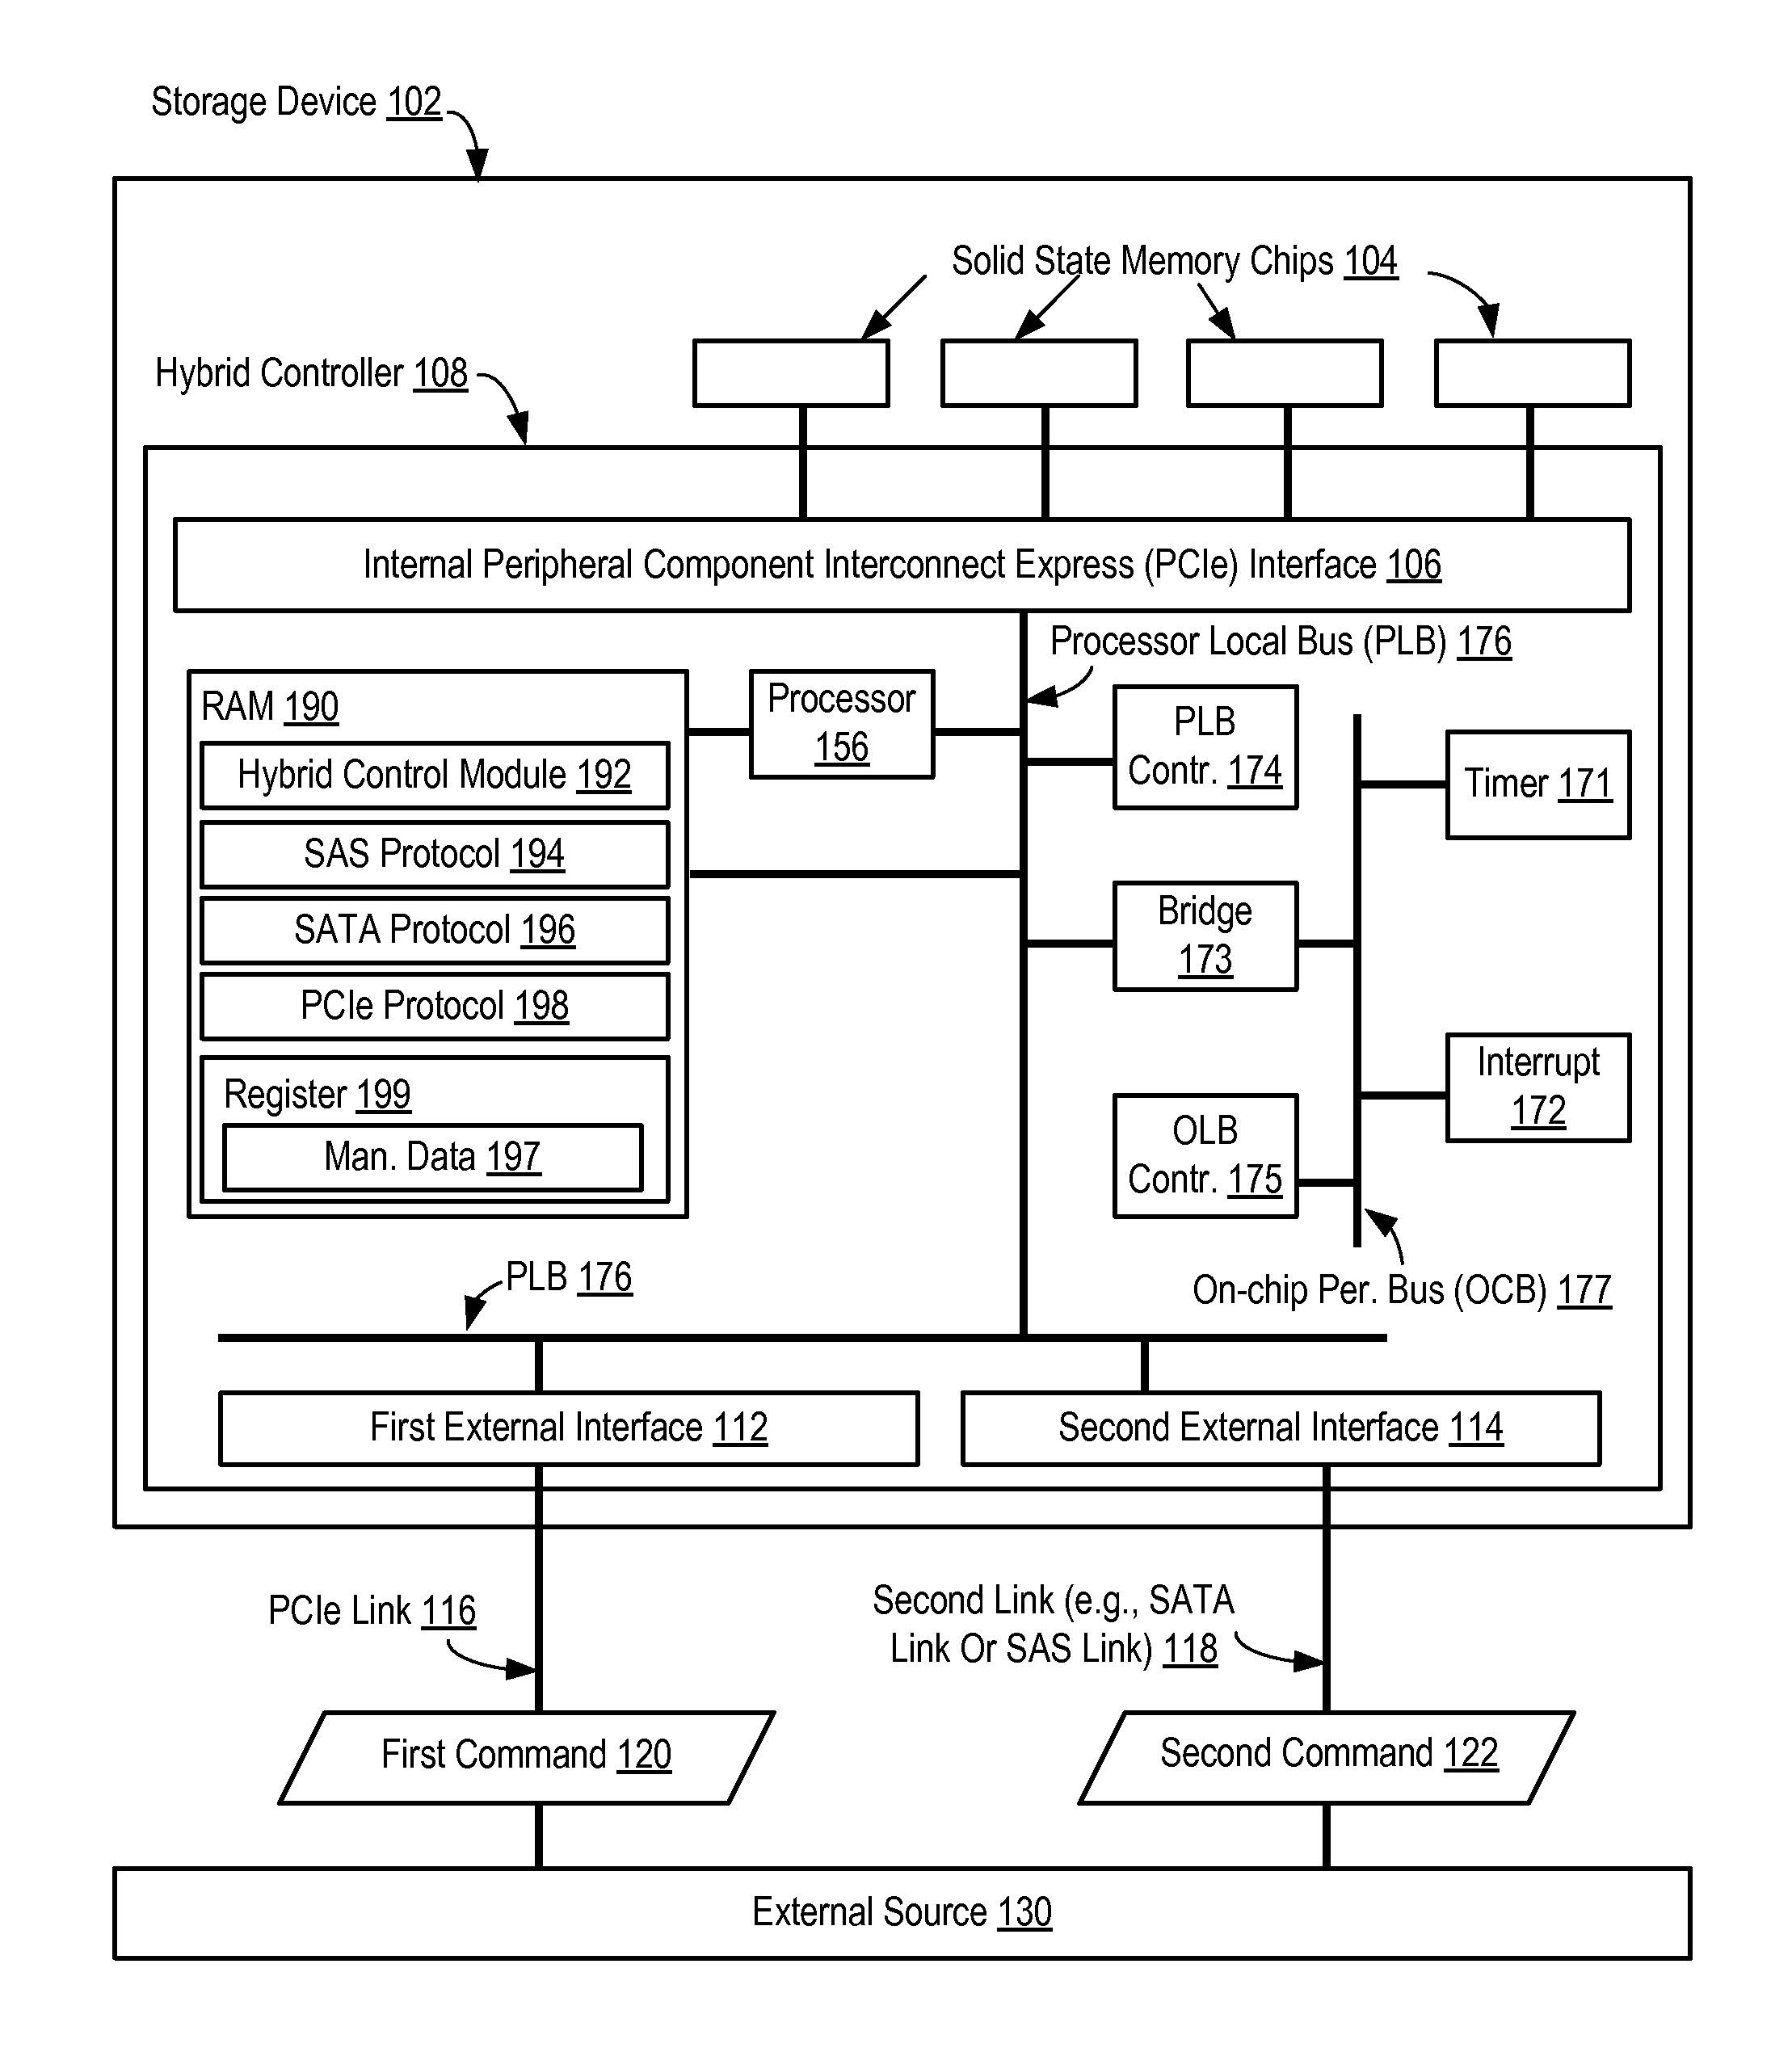 Managing A Storage Device Using A Hybrid Controller